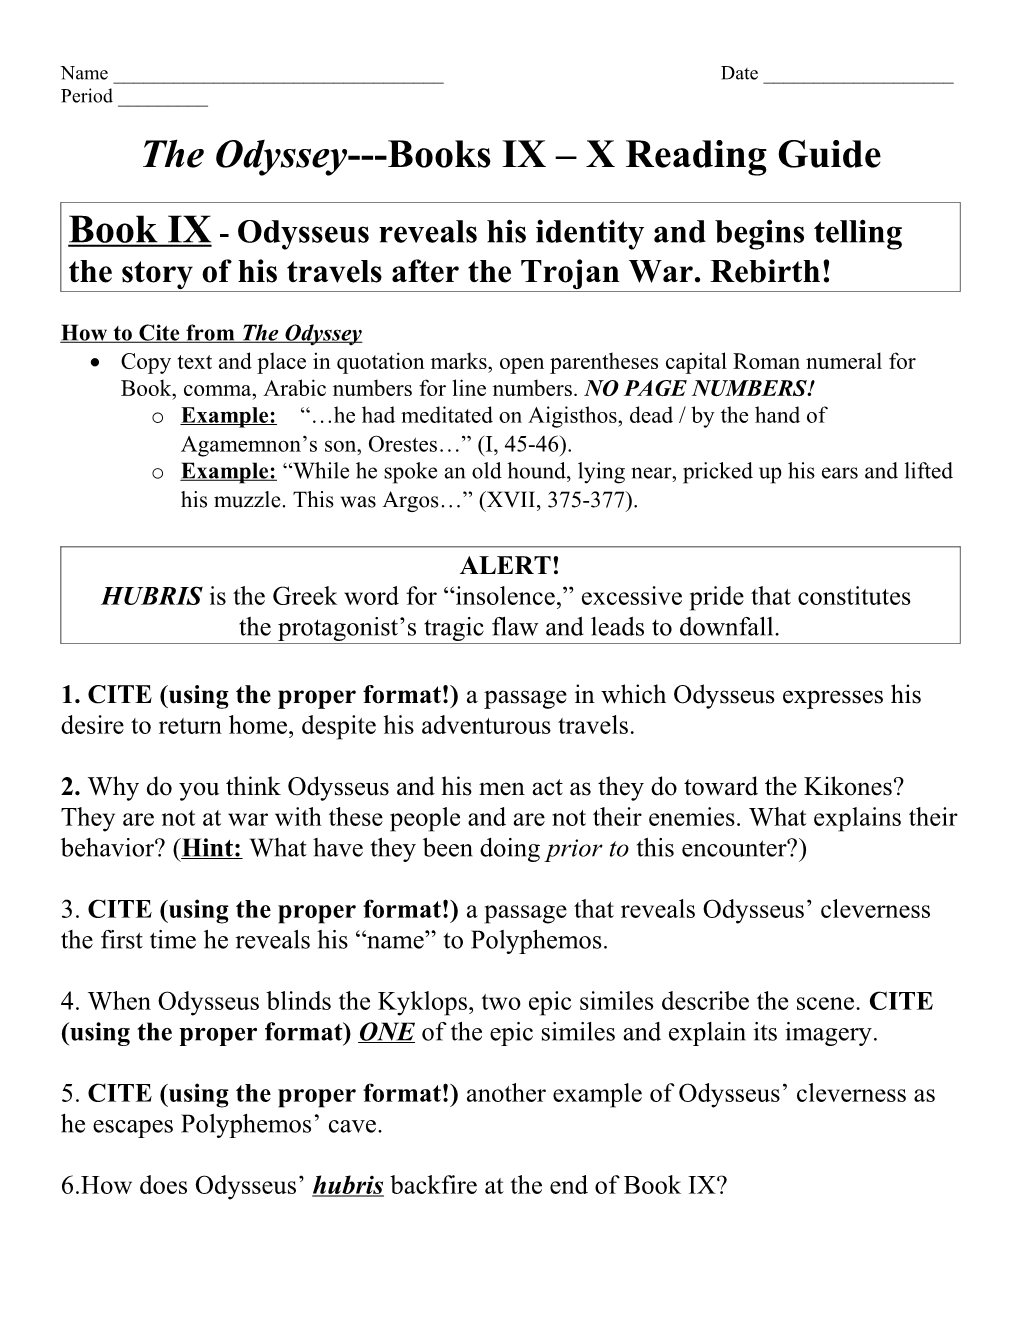 The Odyssey Books IX X Reading Guide